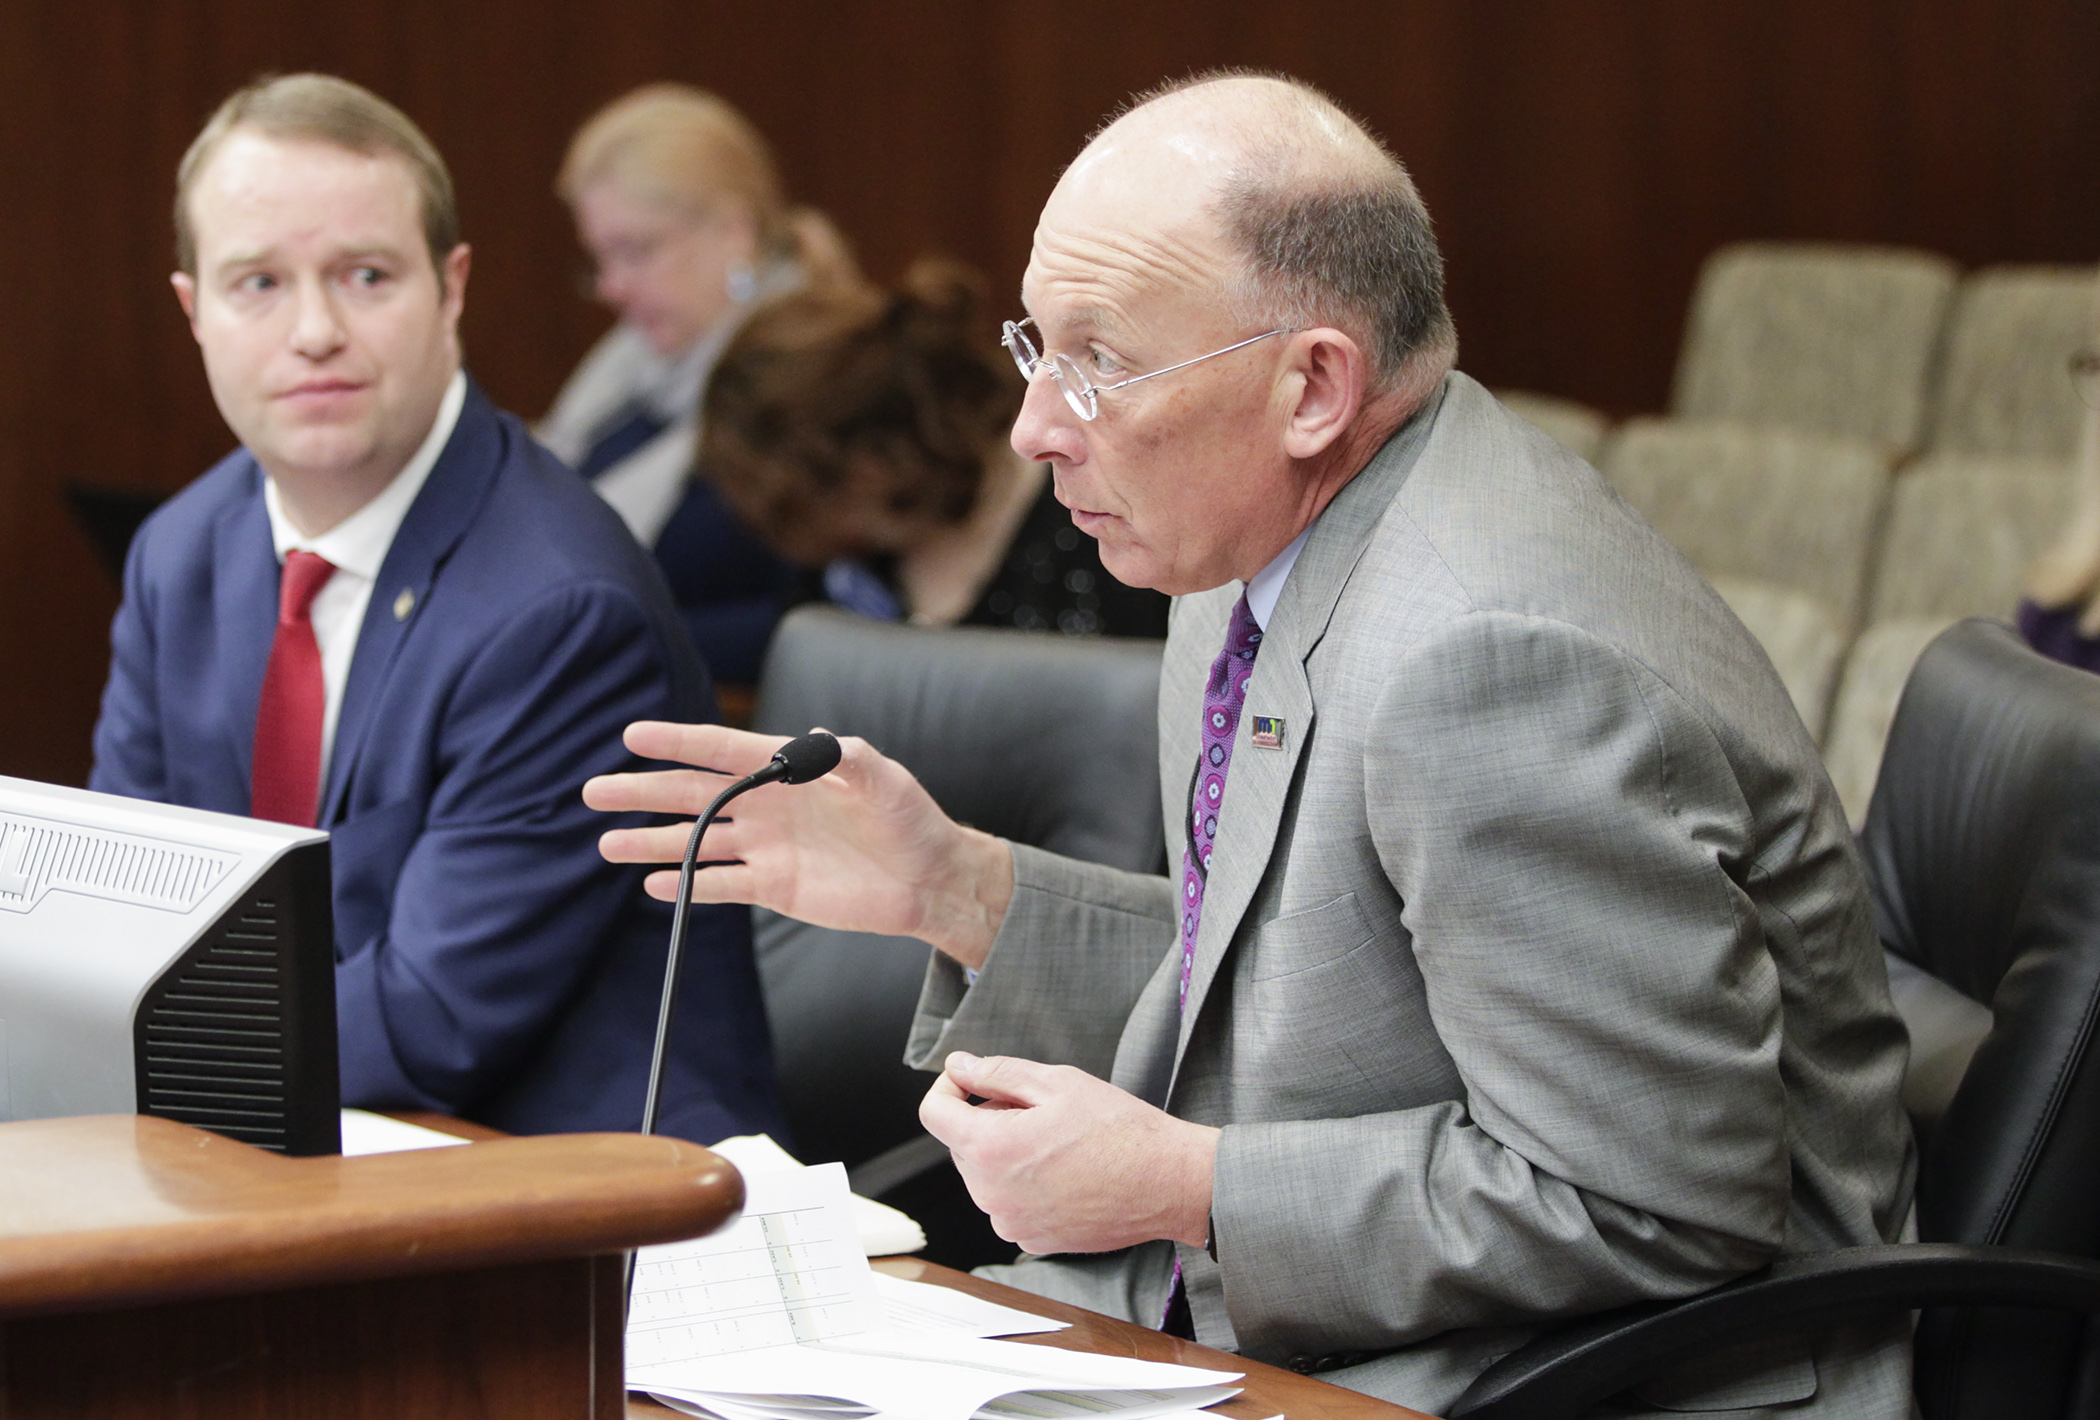 Corrections Commissioner Paul Schnell testifies before the House Corrections Division on HF493, sponsored by Rep. Nick Zerwas, left, to establish guidelines for the use of administrative and disciplinary segregation in state prisons. Photo by Paul Battaglia